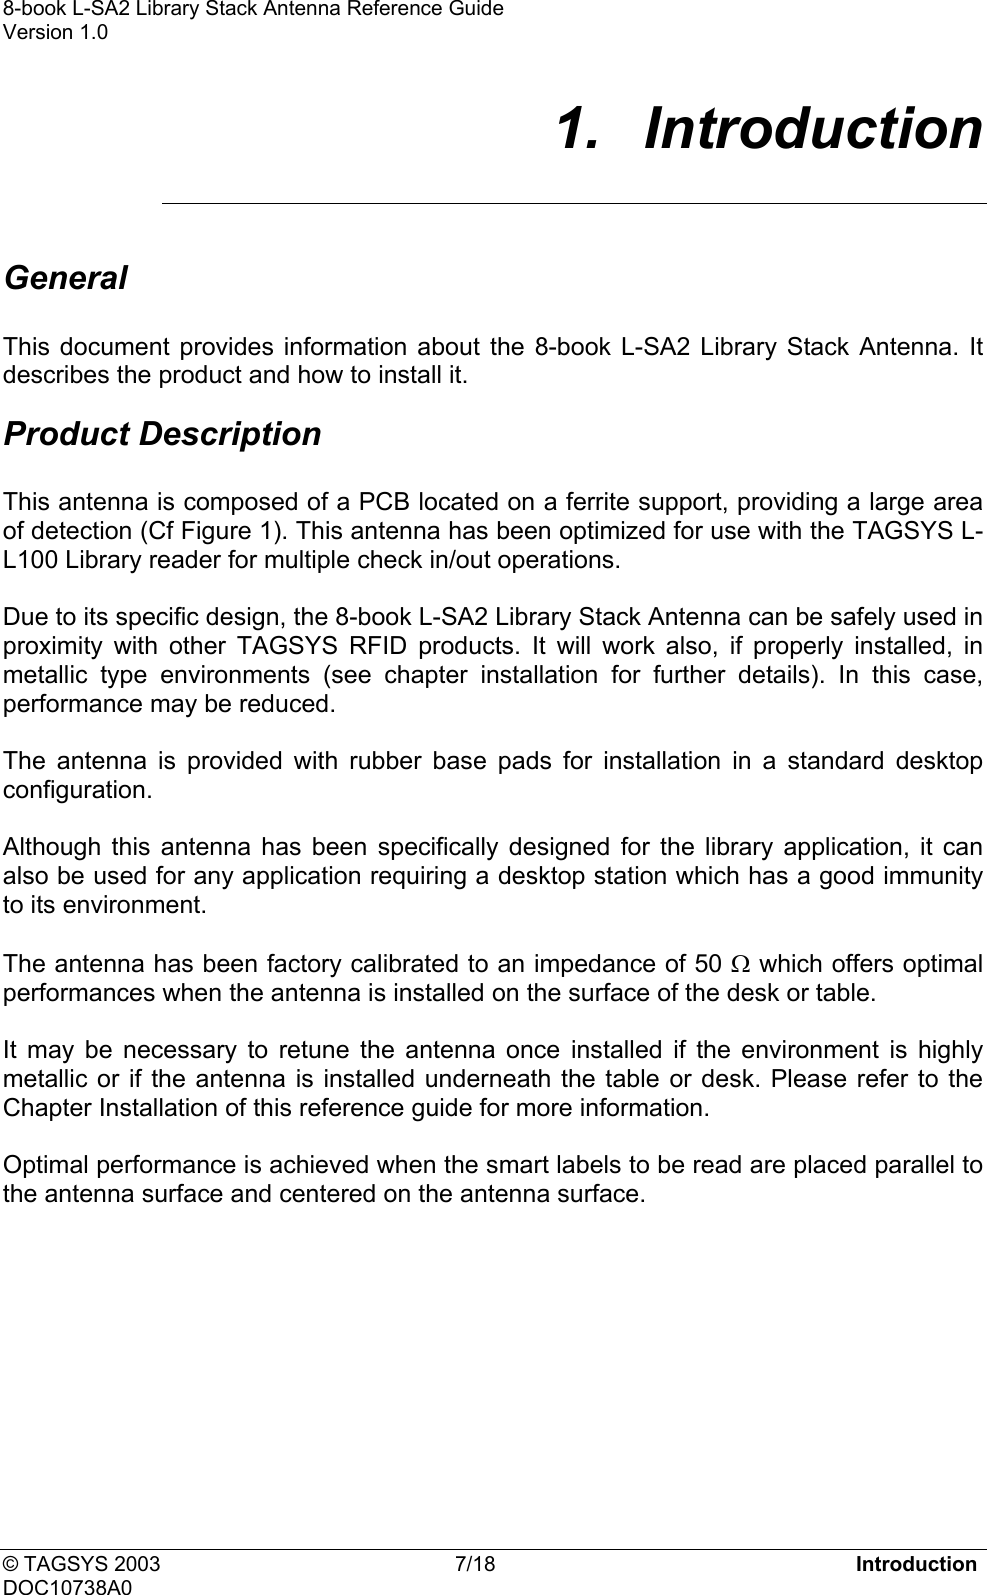 8-book L-SA2 Library Stack Antenna Reference Guide    Version 1.0 1.  Introduction  General  This document provides information about the 8-book L-SA2 Library Stack Antenna. It describes the product and how to install it. Product Description  This antenna is composed of a PCB located on a ferrite support, providing a large area of detection (Cf Figure 1). This antenna has been optimized for use with the TAGSYS L-L100 Library reader for multiple check in/out operations.  Due to its specific design, the 8-book L-SA2 Library Stack Antenna can be safely used in proximity with other TAGSYS RFID products. It will work also, if properly installed, in metallic type environments (see chapter installation for further details). In this case, performance may be reduced.  The antenna is provided with rubber base pads for installation in a standard desktop configuration.  Although this antenna has been specifically designed for the library application, it can also be used for any application requiring a desktop station which has a good immunity to its environment.   The antenna has been factory calibrated to an impedance of 50 Ω which offers optimal performances when the antenna is installed on the surface of the desk or table.  It may be necessary to retune the antenna once installed if the environment is highly metallic or if the antenna is installed underneath the table or desk. Please refer to the Chapter Installation of this reference guide for more information.   Optimal performance is achieved when the smart labels to be read are placed parallel to the antenna surface and centered on the antenna surface.   © TAGSYS 2003  7/18  Introduction DOC10738A0 